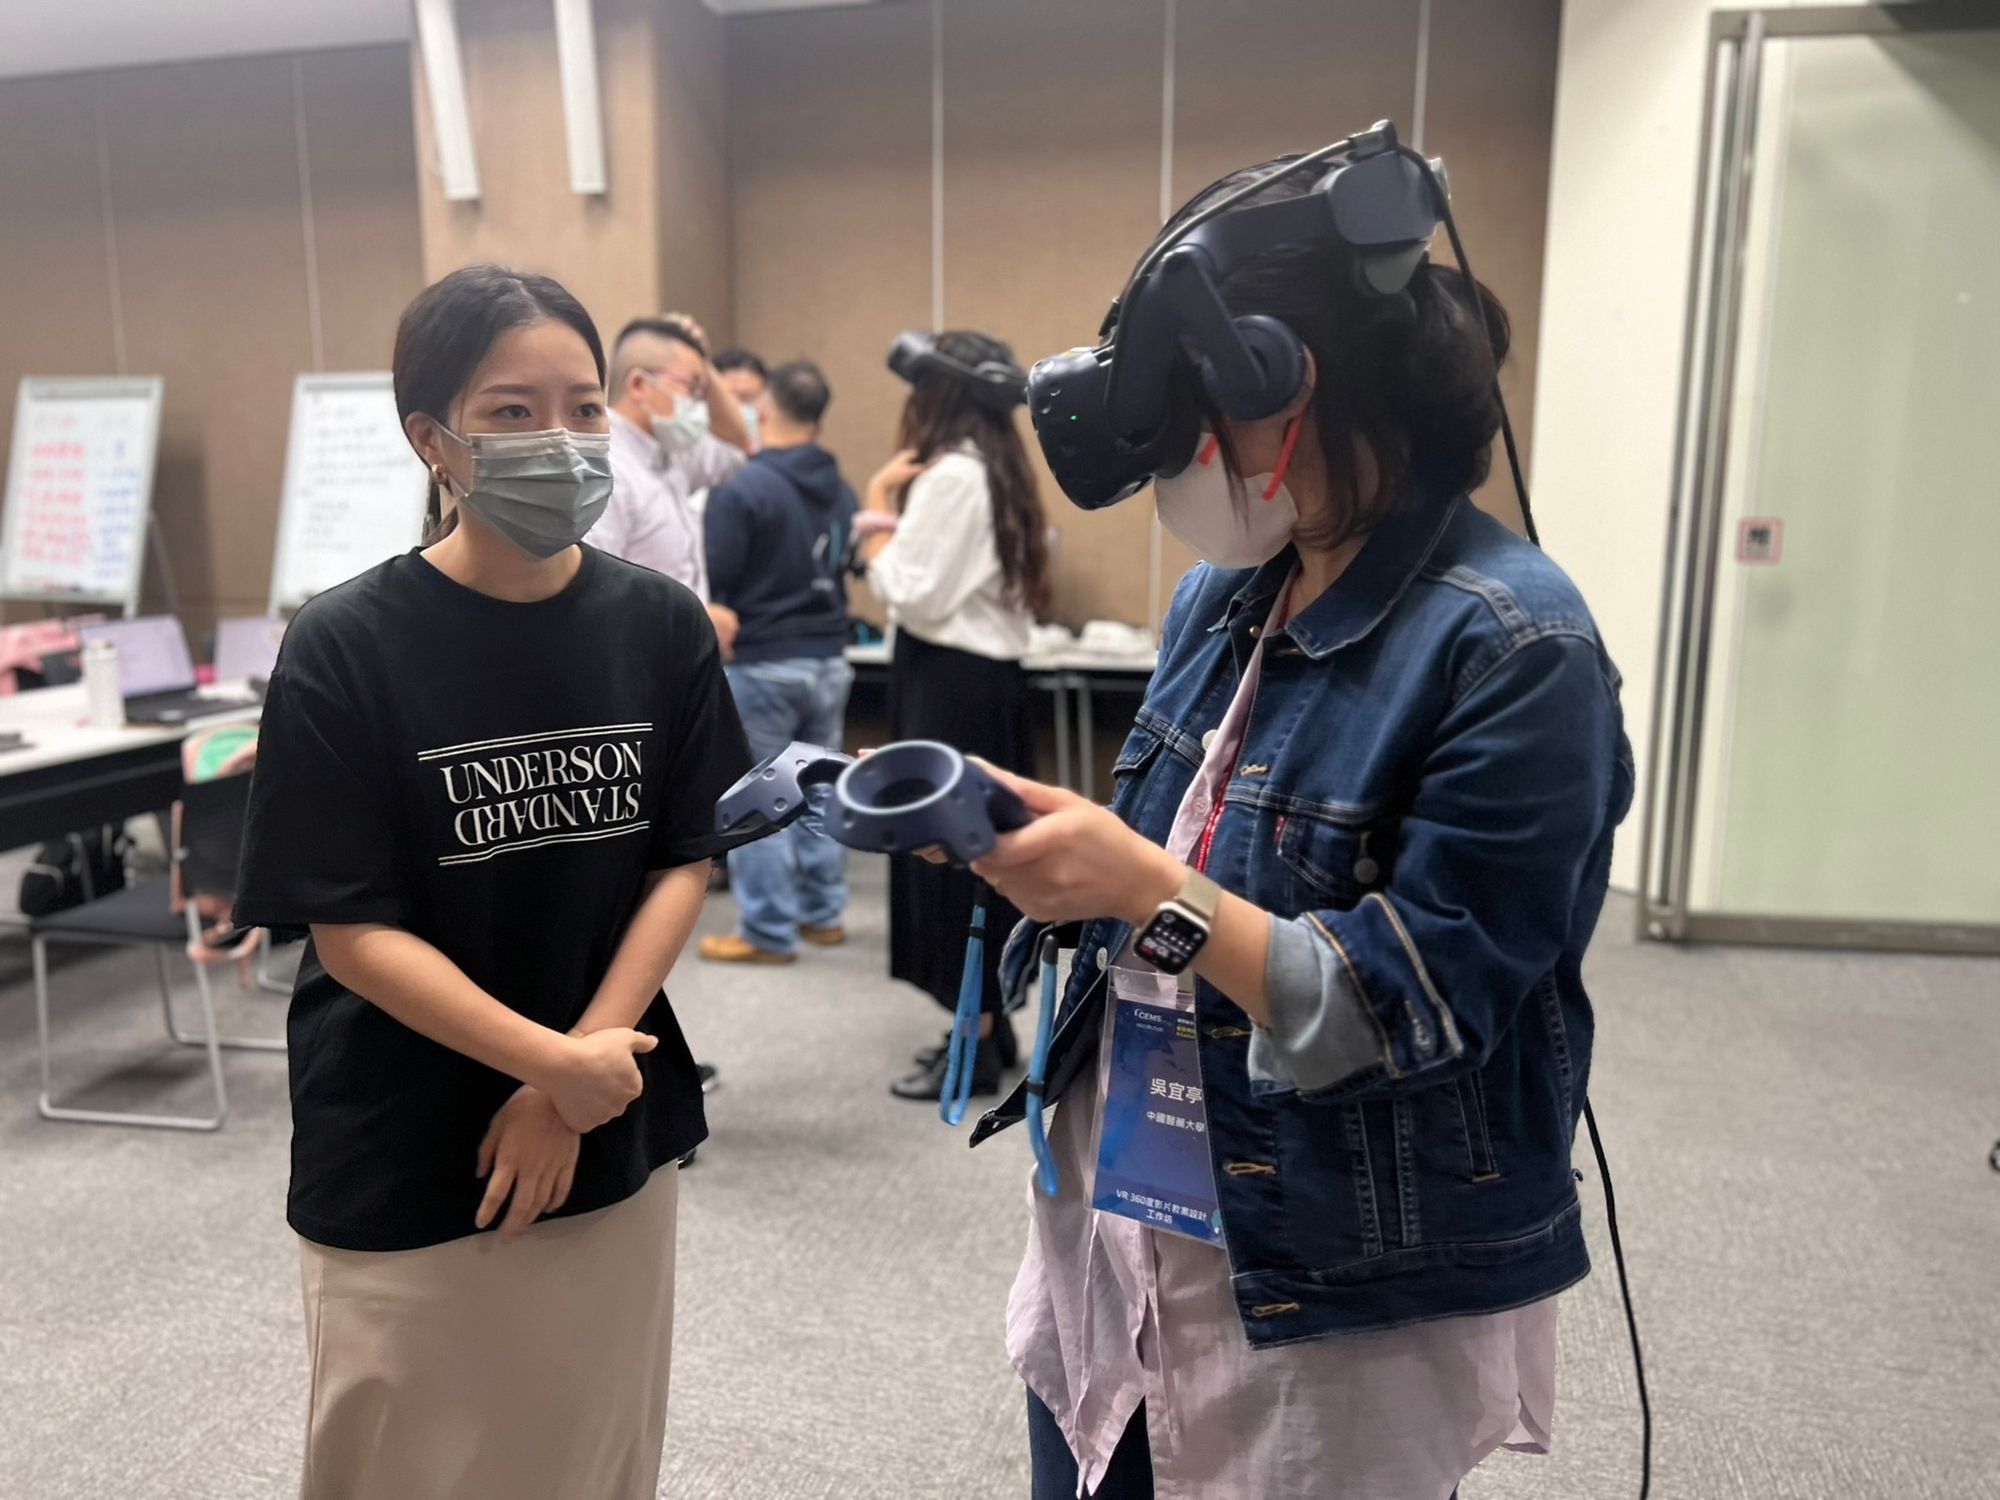 HTC VIVE is transforming medical education with virtual reality